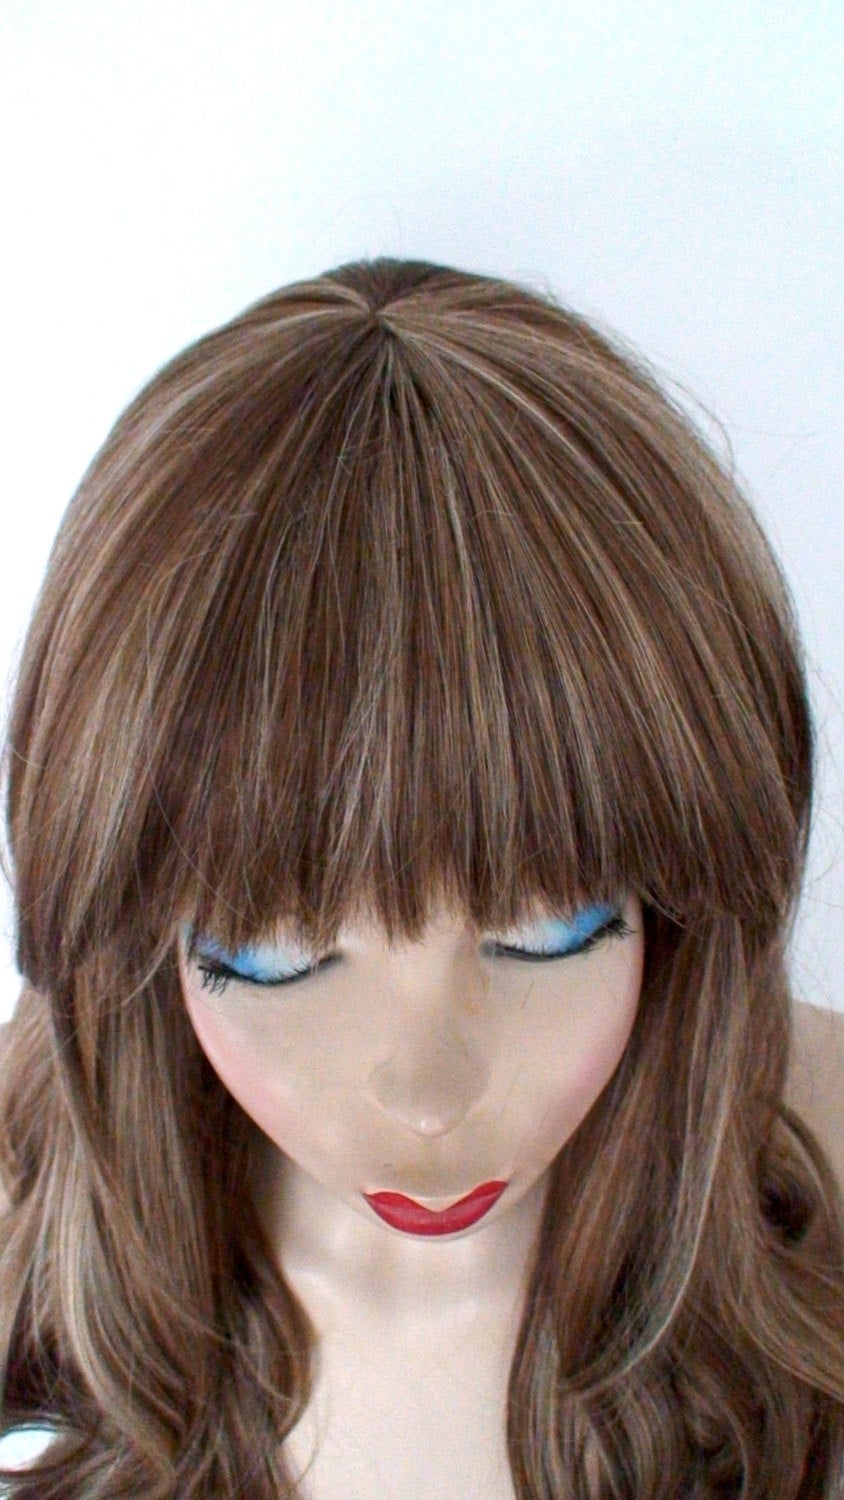 26" Brown Ash Blonde Highlight Long Curly Hair with Bangs Wig